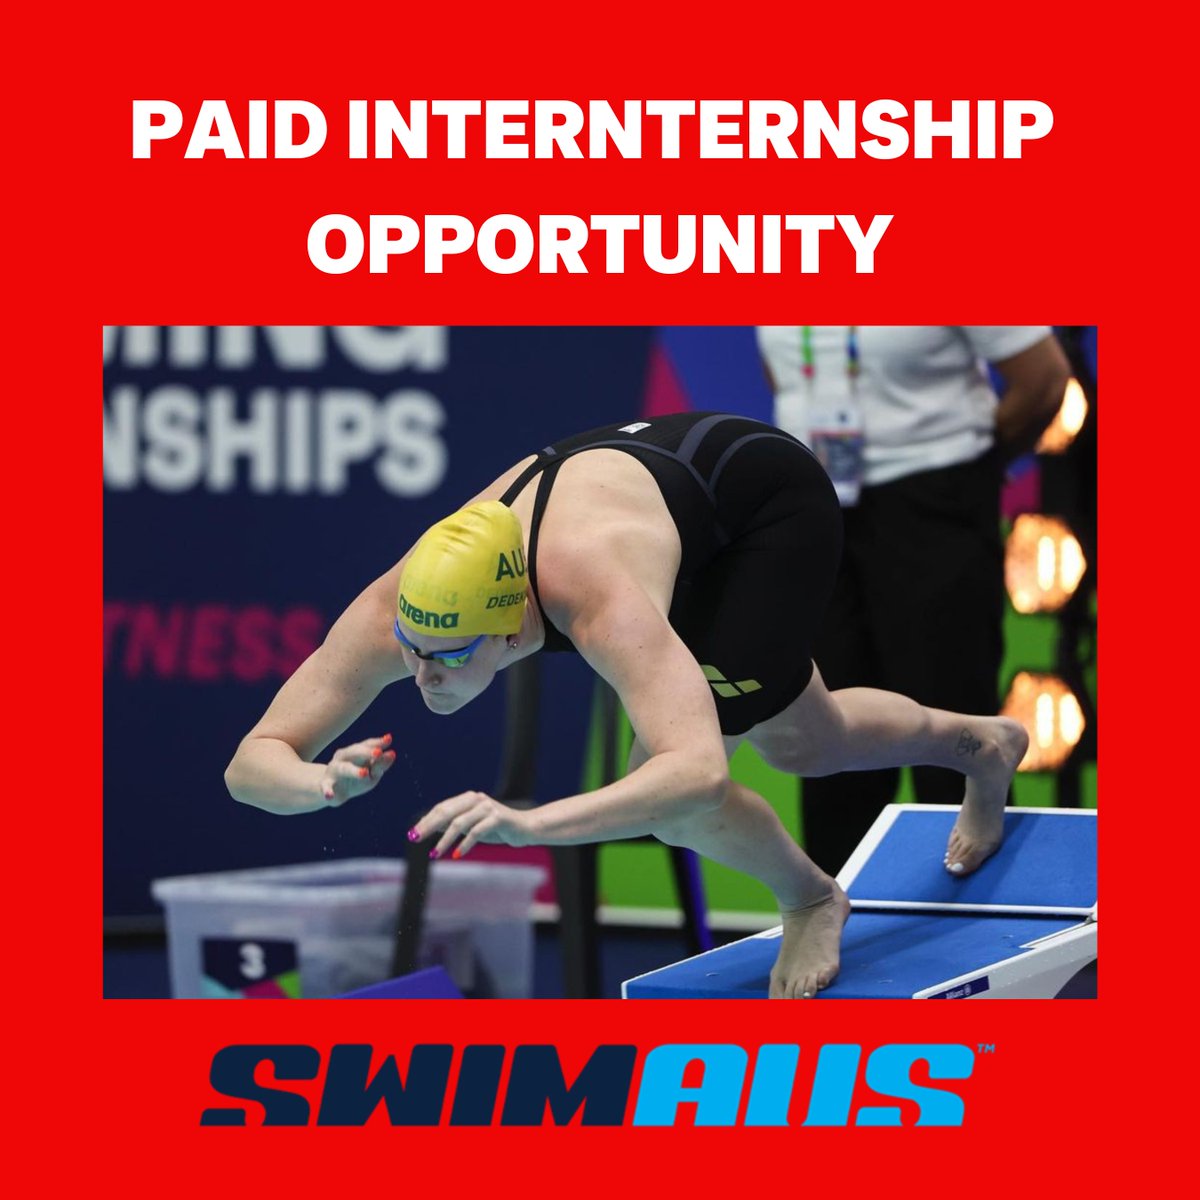 Swimming Australia are currently offering a paid internship opportunity exclusively for Griffith University students ‼️ The role: Paralympic Program Coordinator Duration: 1 day per week over 12 months Location: Brisbane For more information, please email: gsc@griffith.edu.au